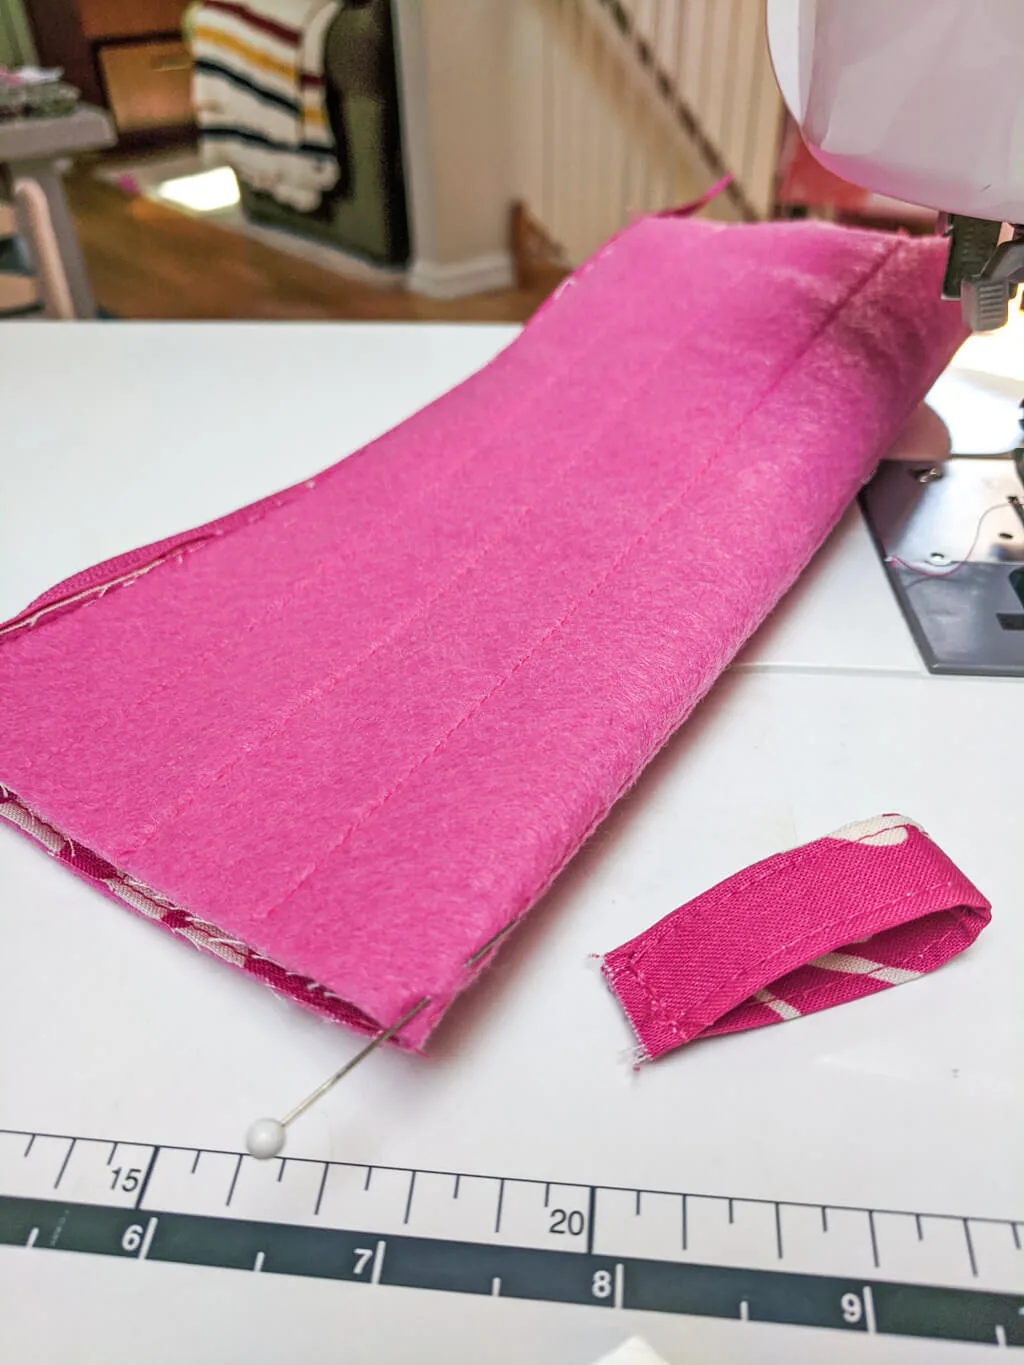 How to add a tab to a zipper pencil case pouch